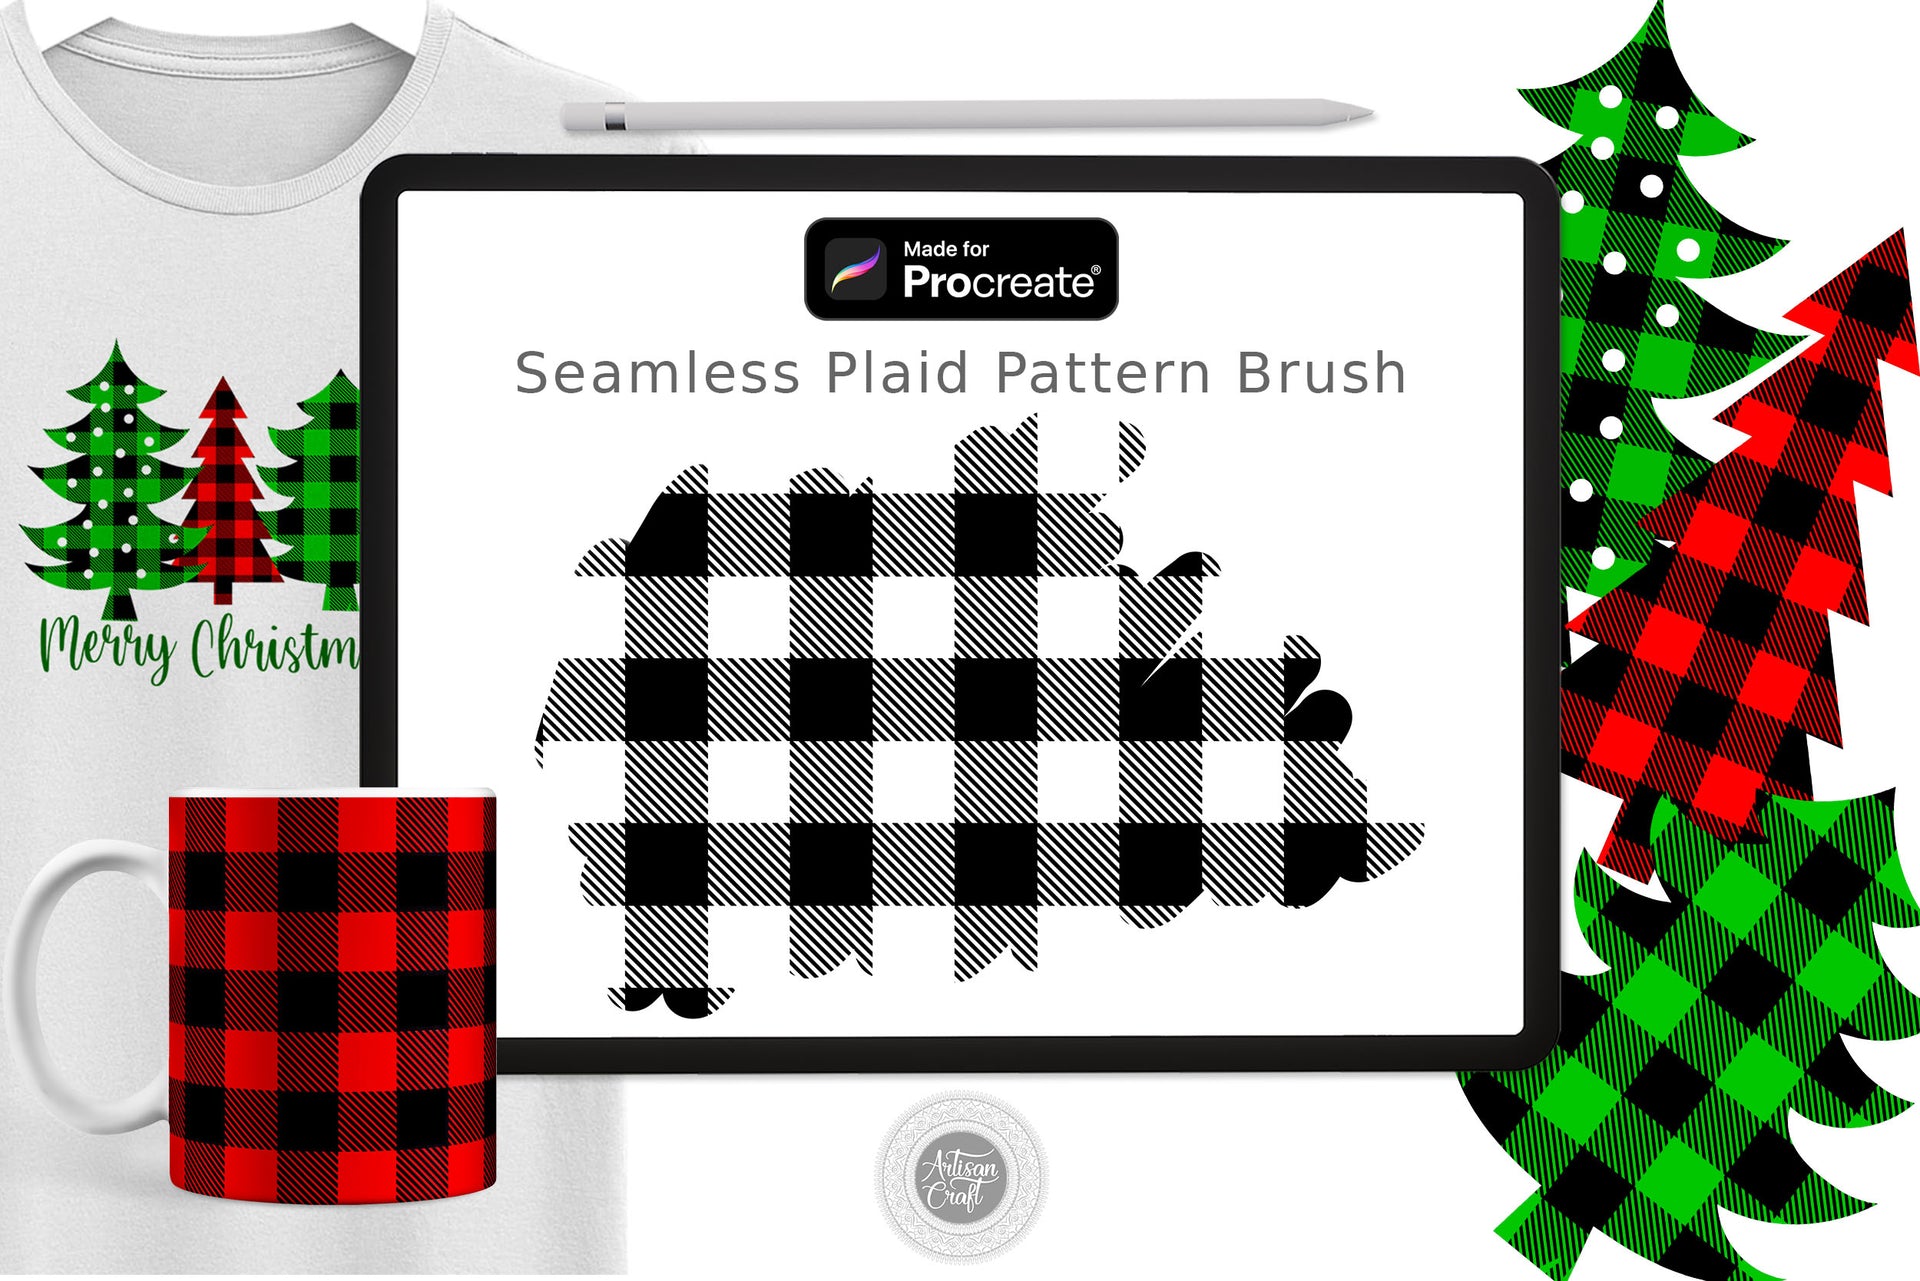 Load video: Plaid procreate brush with seamless pattern